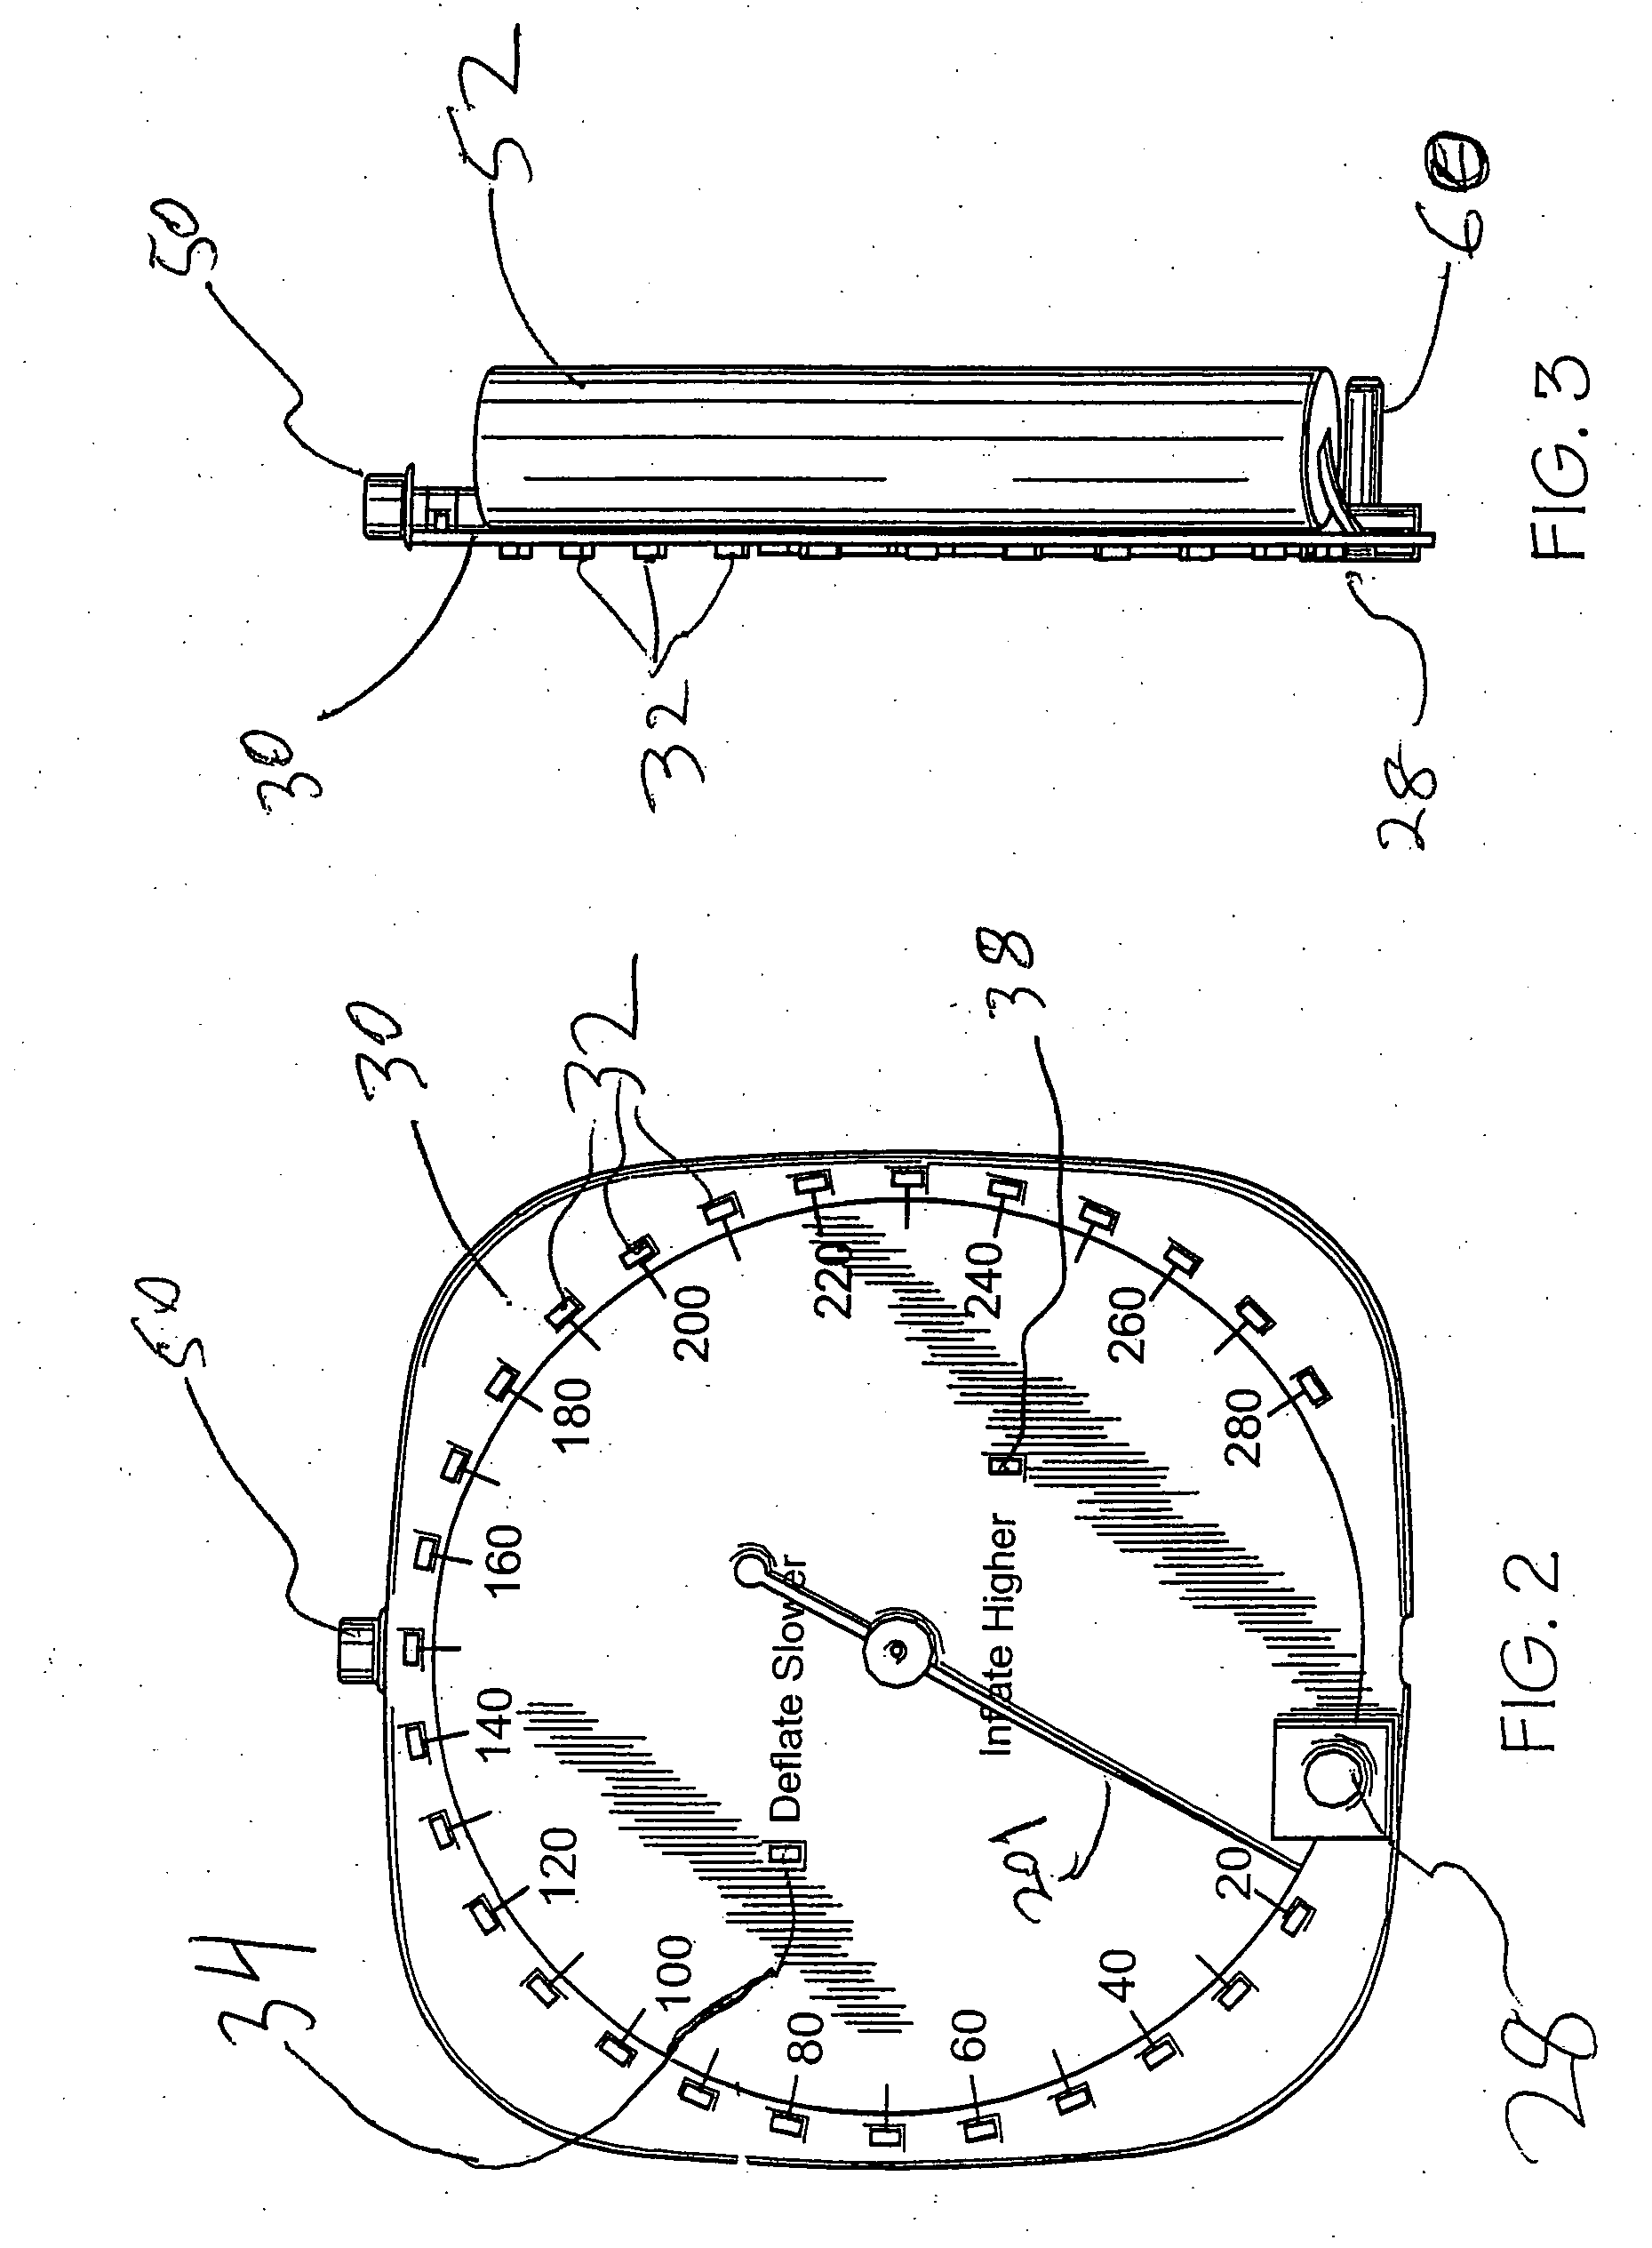 Integrated manual mechanical and electronic sphygmomanometer within a single enclosure